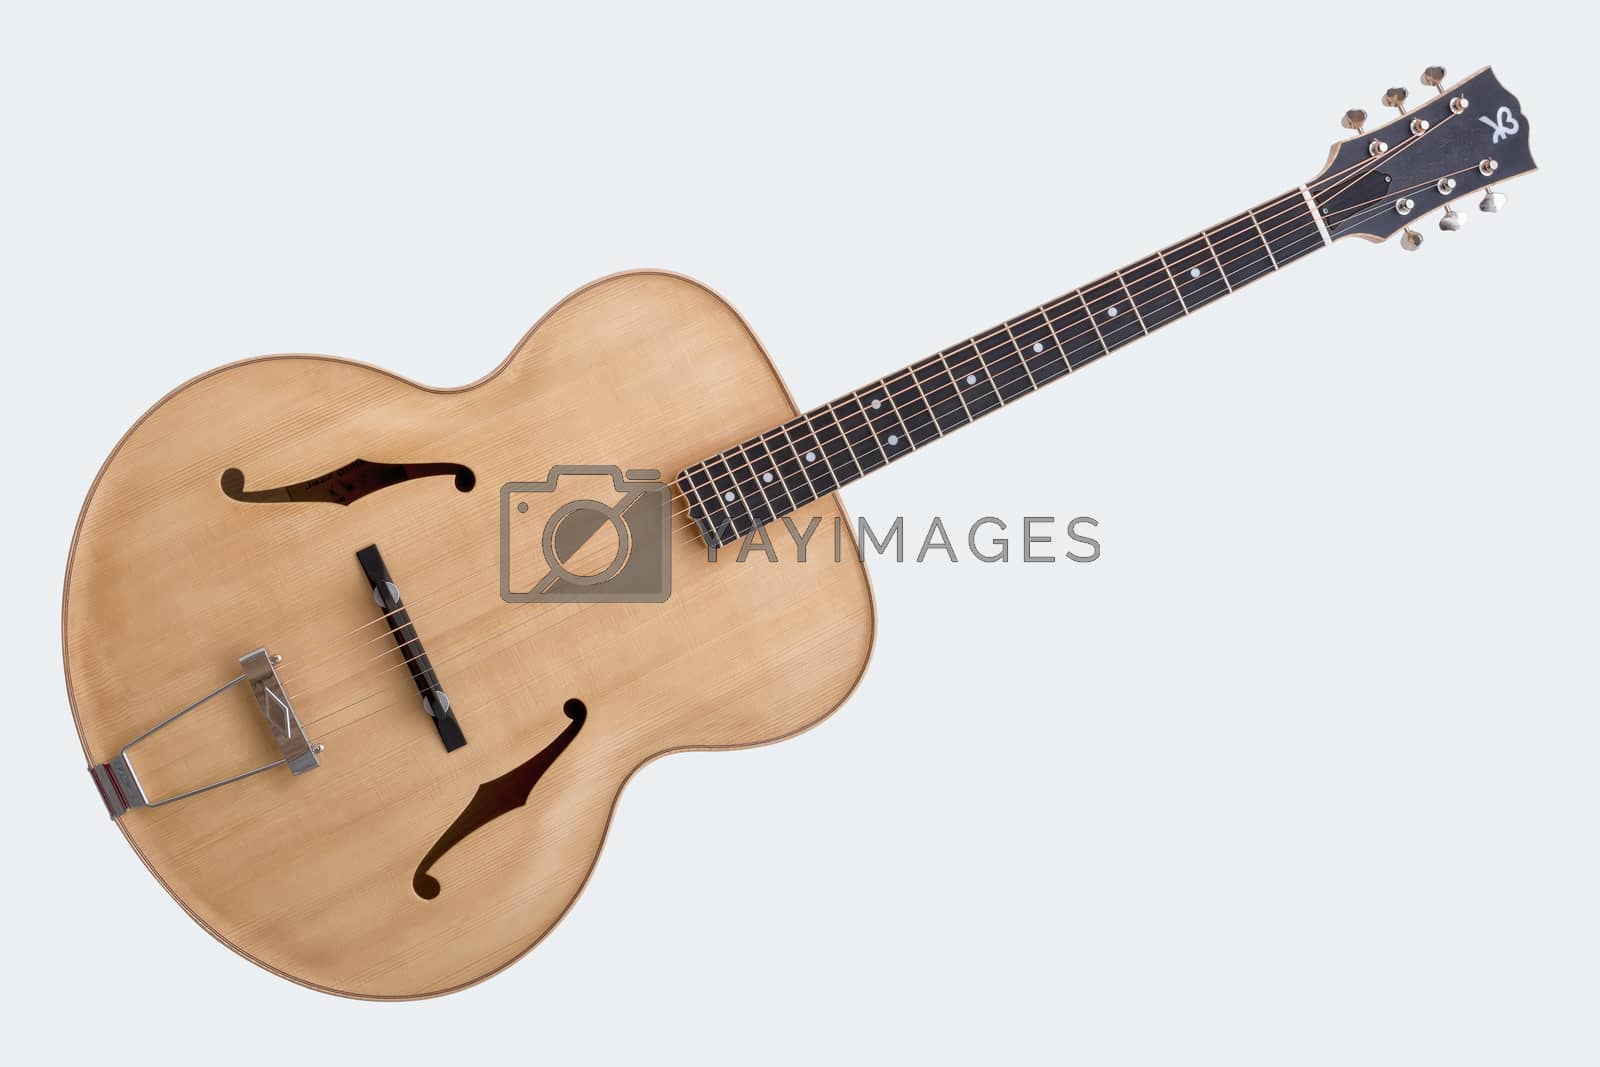 Royalty free image of Handmade guitar on a white background by neryx